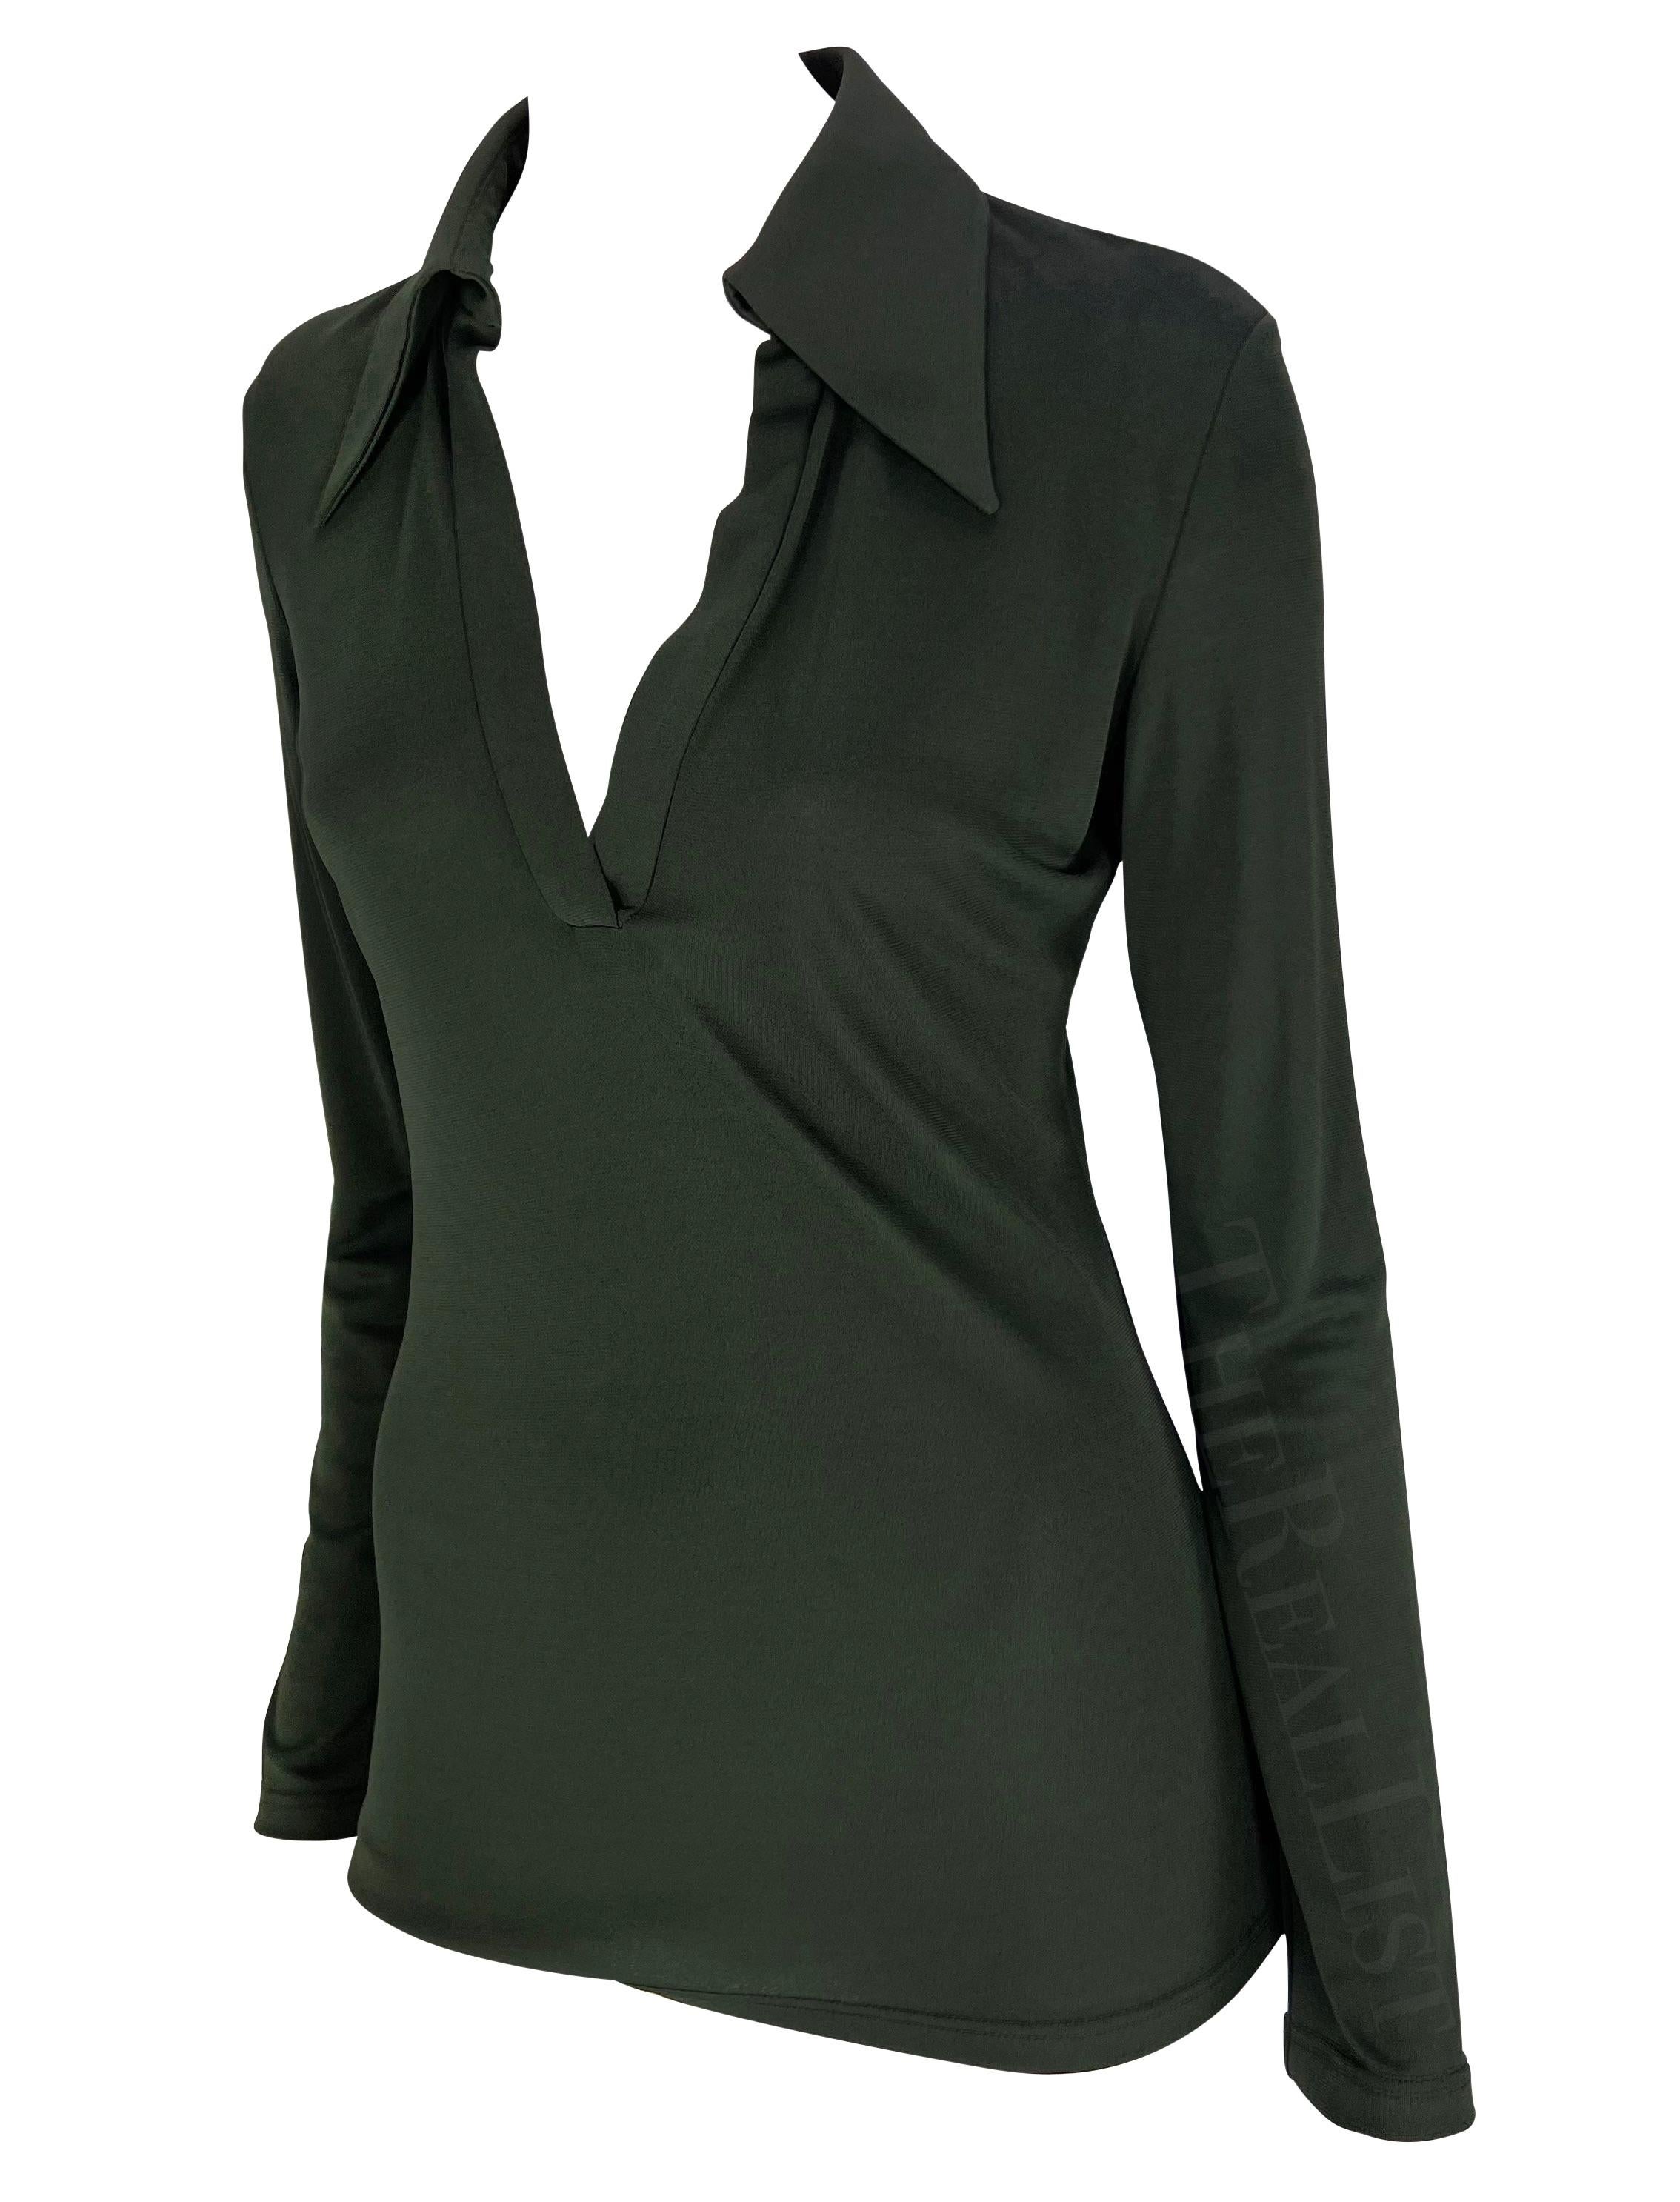 Presenting a beautiful dark green Gucci collared top, designed by Tom Ford. From 1996, this long sleeve top features an exaggerated collar and is made complete with a deep v-neckline. Simple and chic, this Gucci by Tom Ford top is the perfect